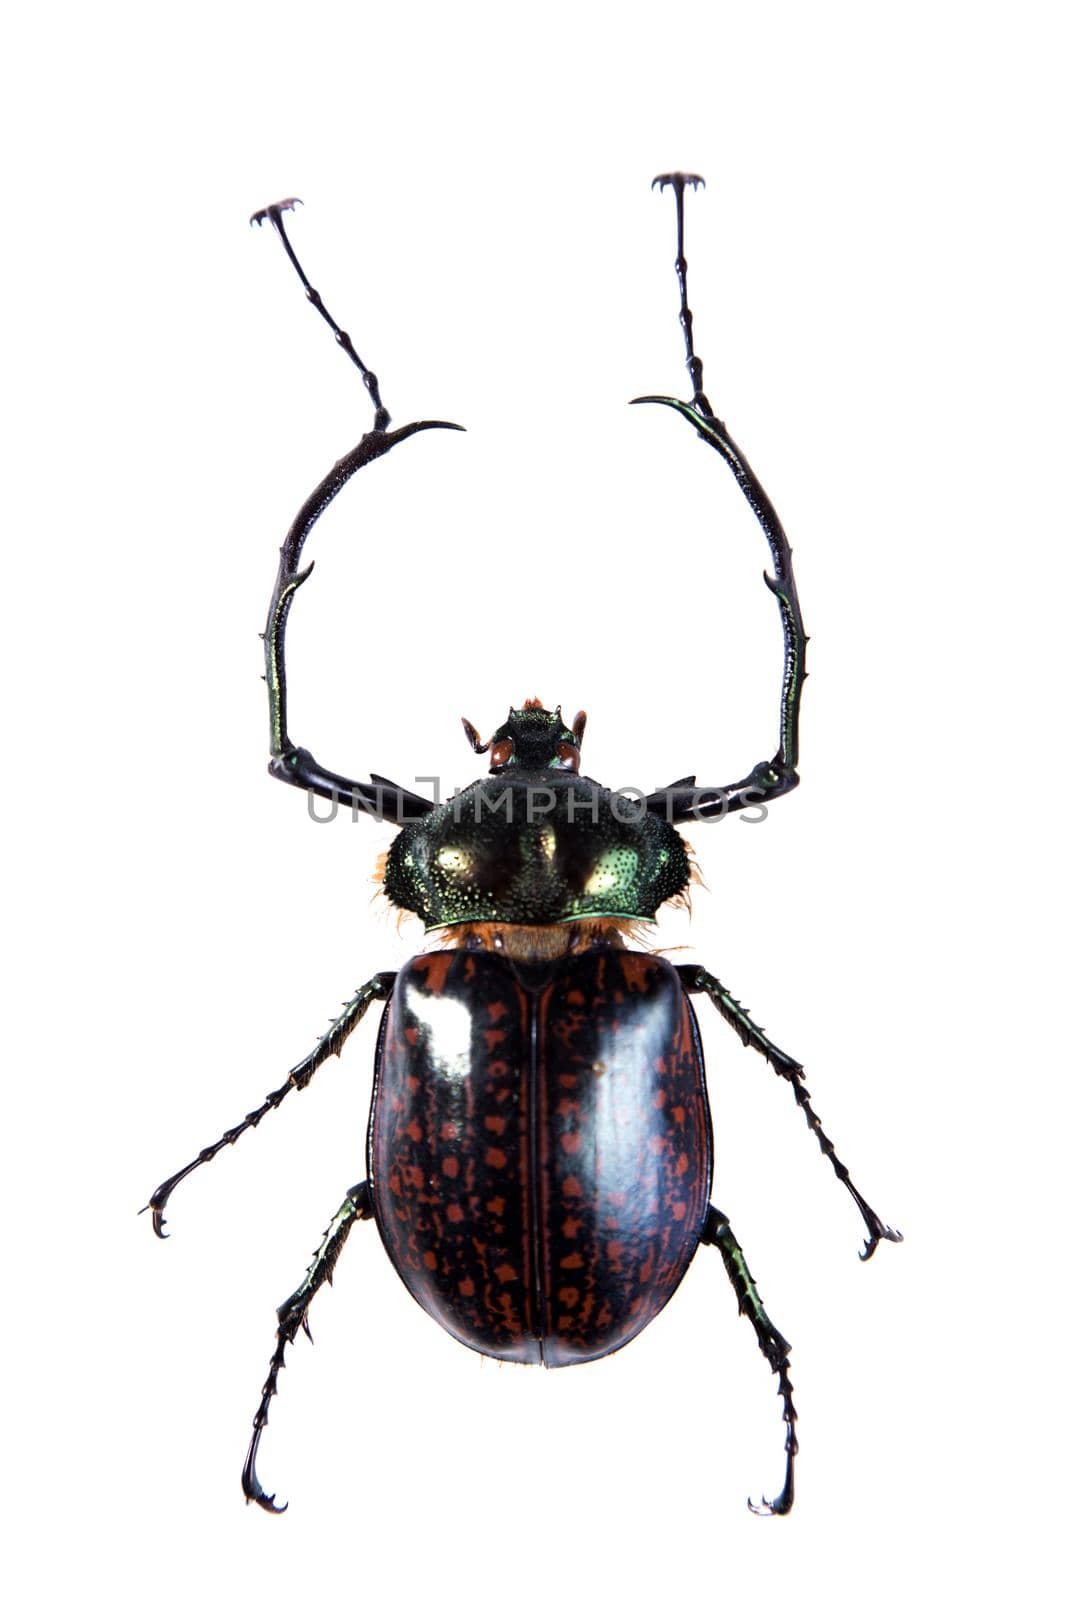 Arlequin beetle in museum isolated on the white background